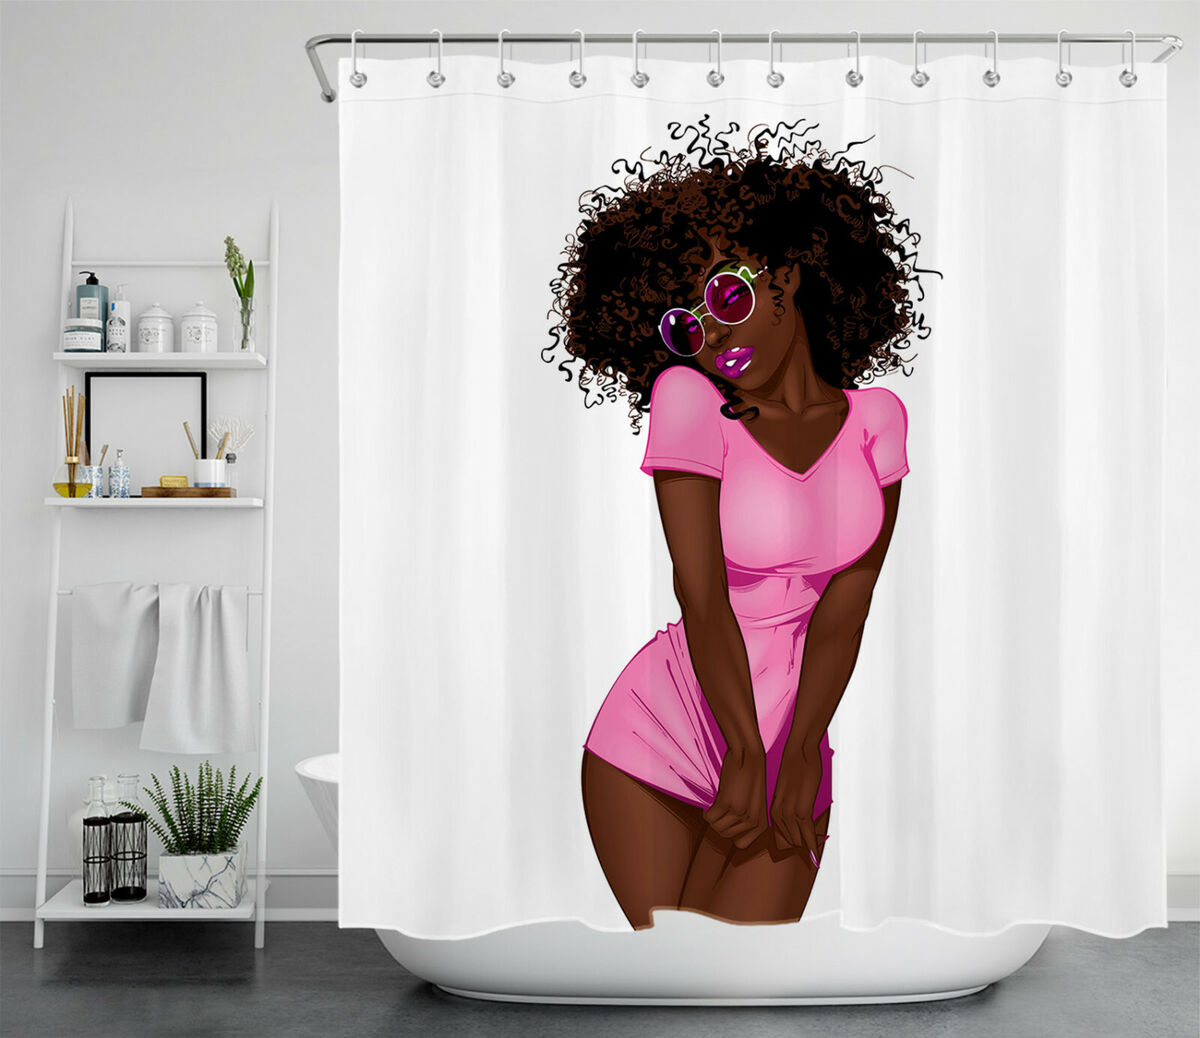 alfie hillier recommends hot black girl in shower pic